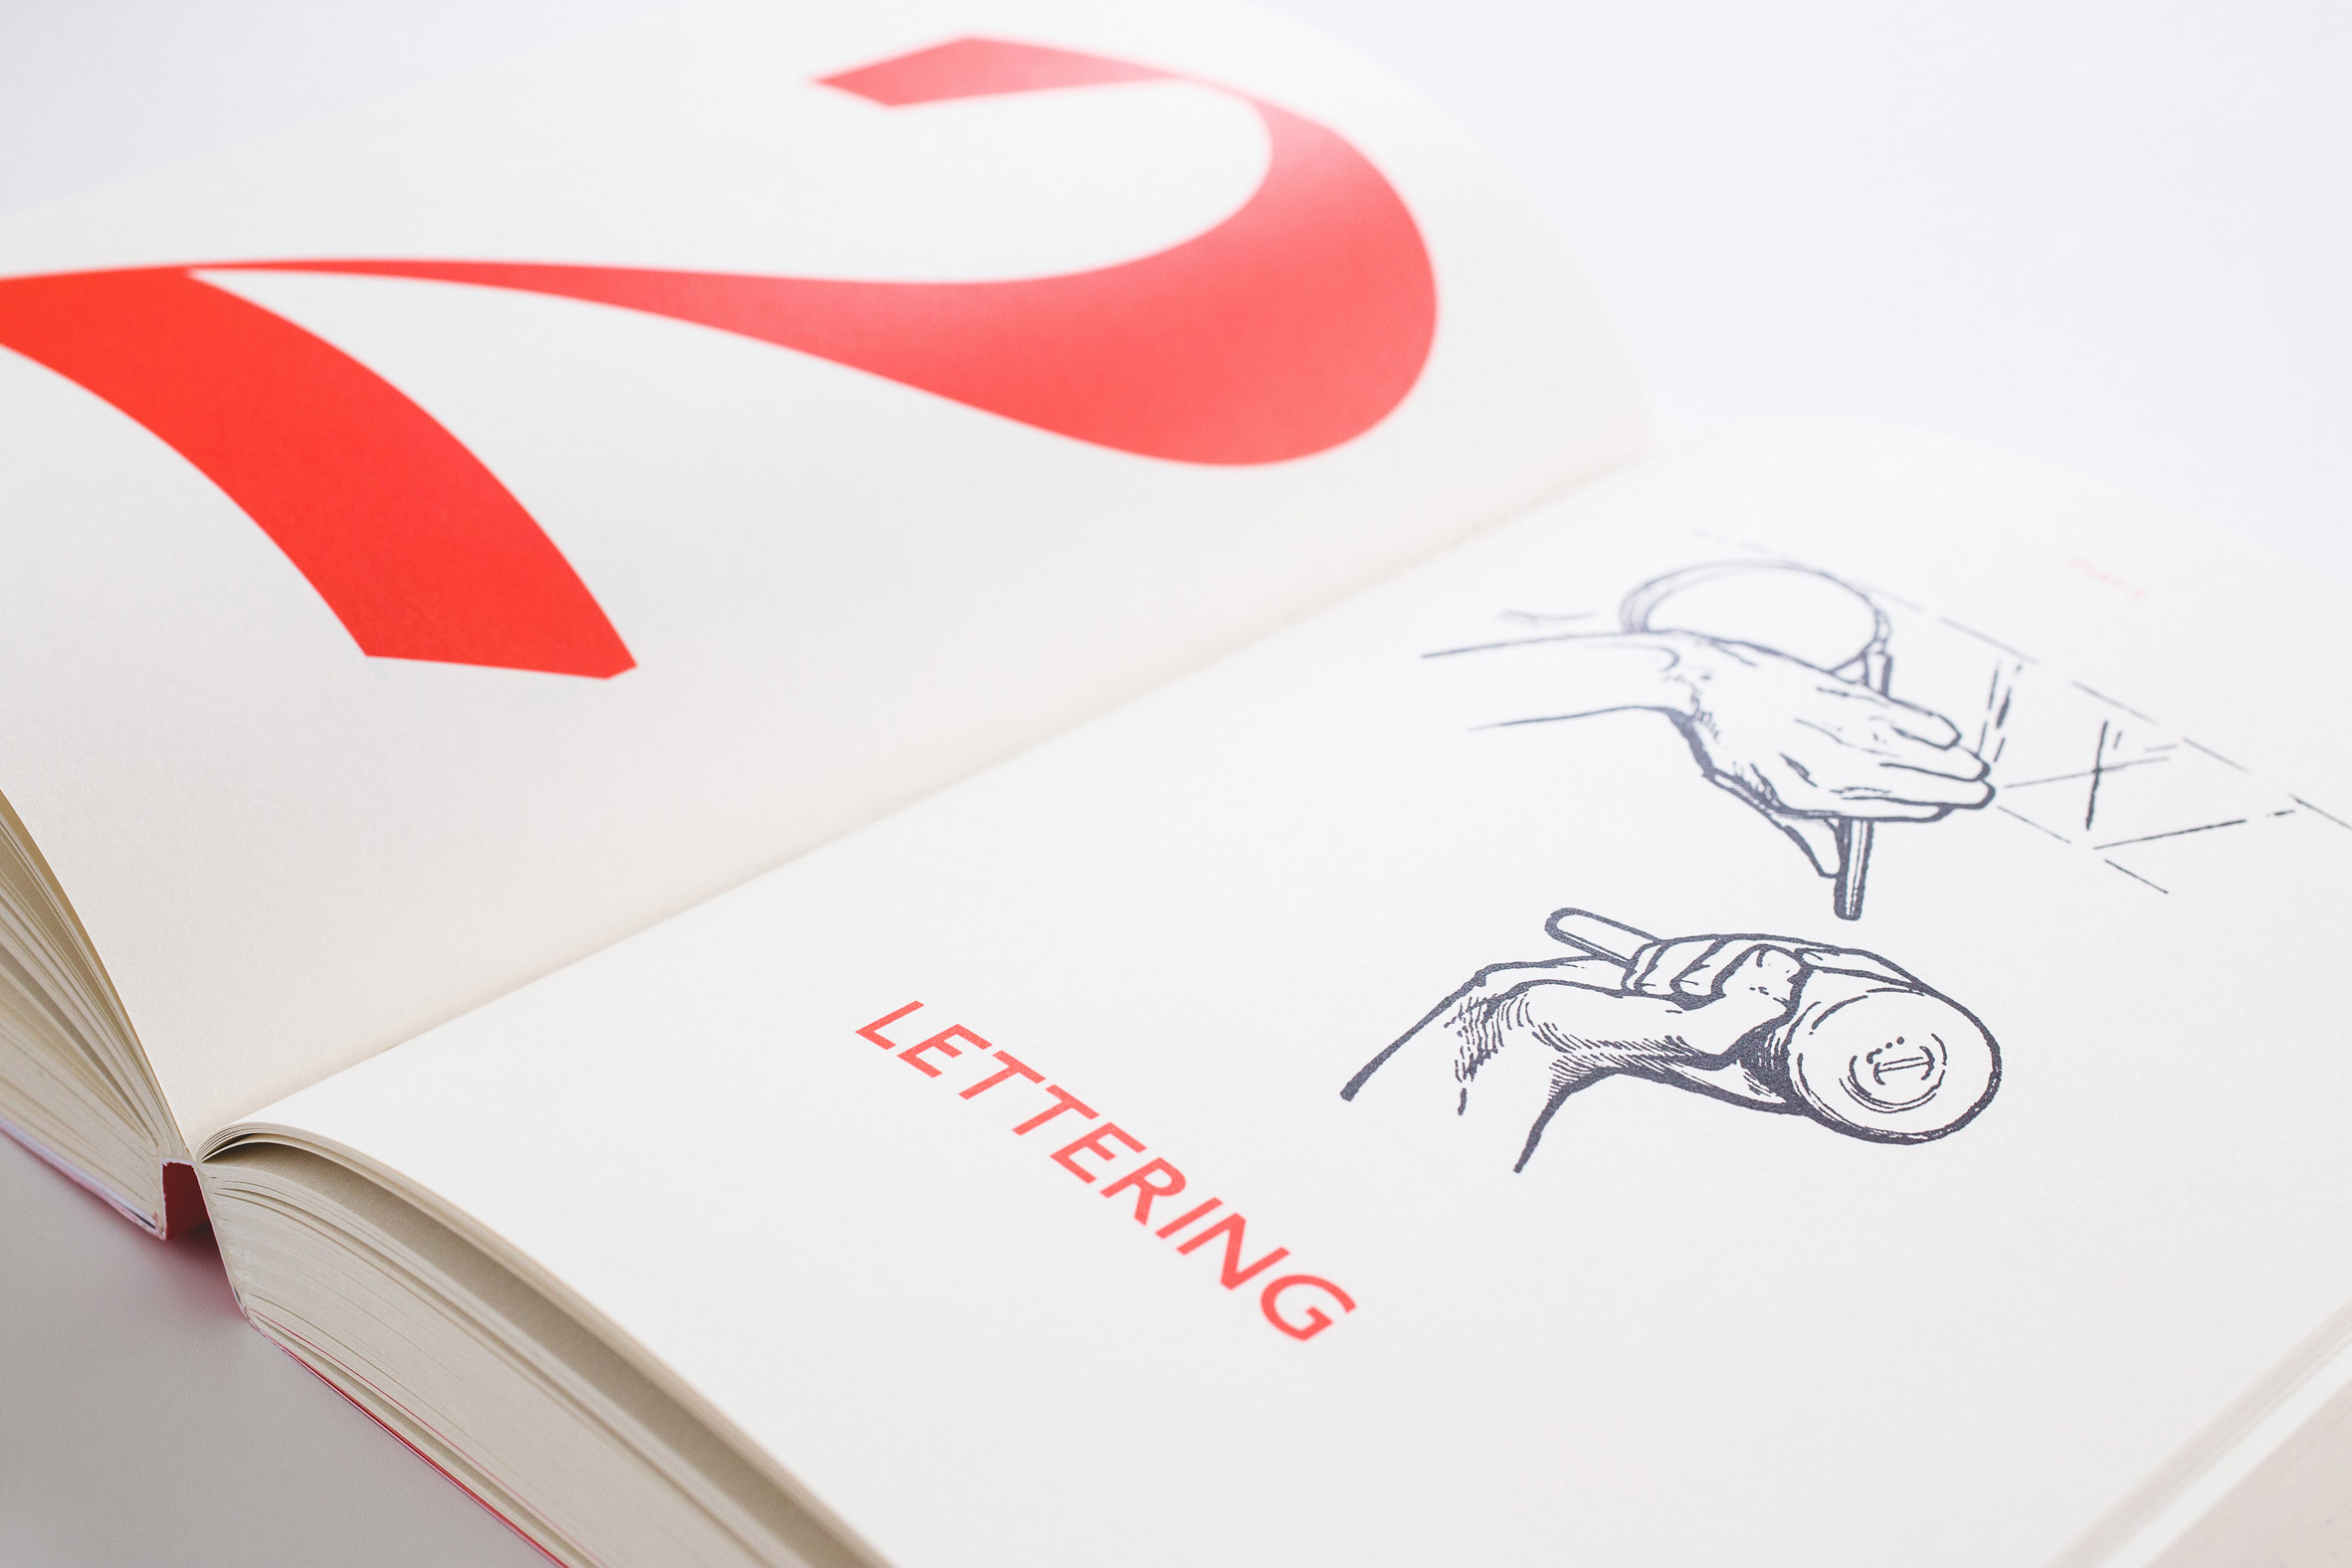 competition-edward-johnston-writing-and-illuminating-lettering-book_dezeen_2364_col_0